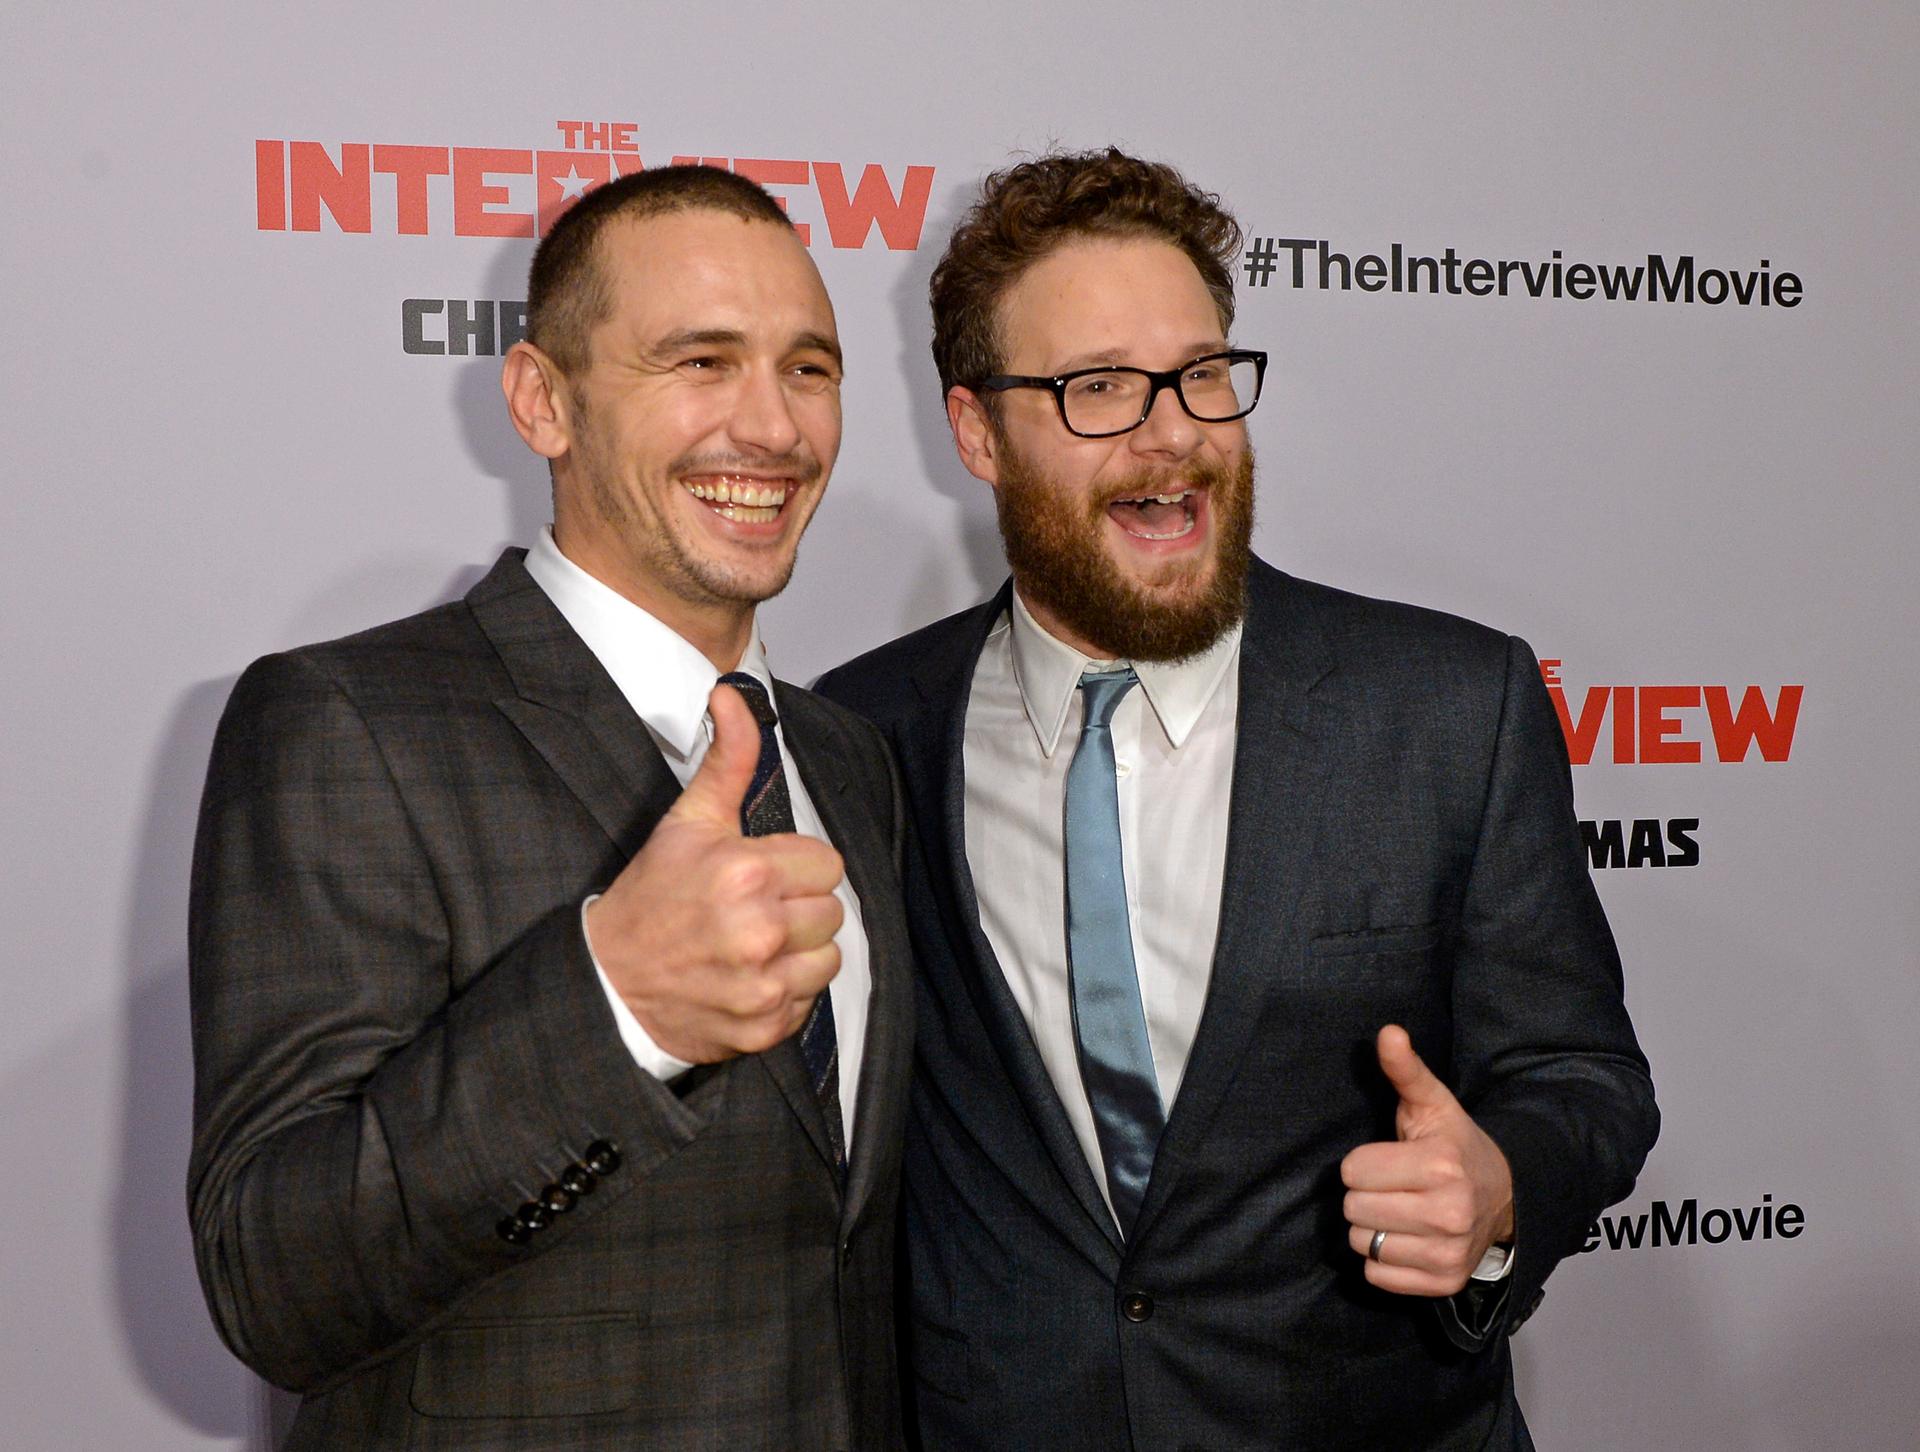 James Franco and Seth Rogen pose during the premiere of the film "The Interview" in Los Angeles on December 11, 2014.